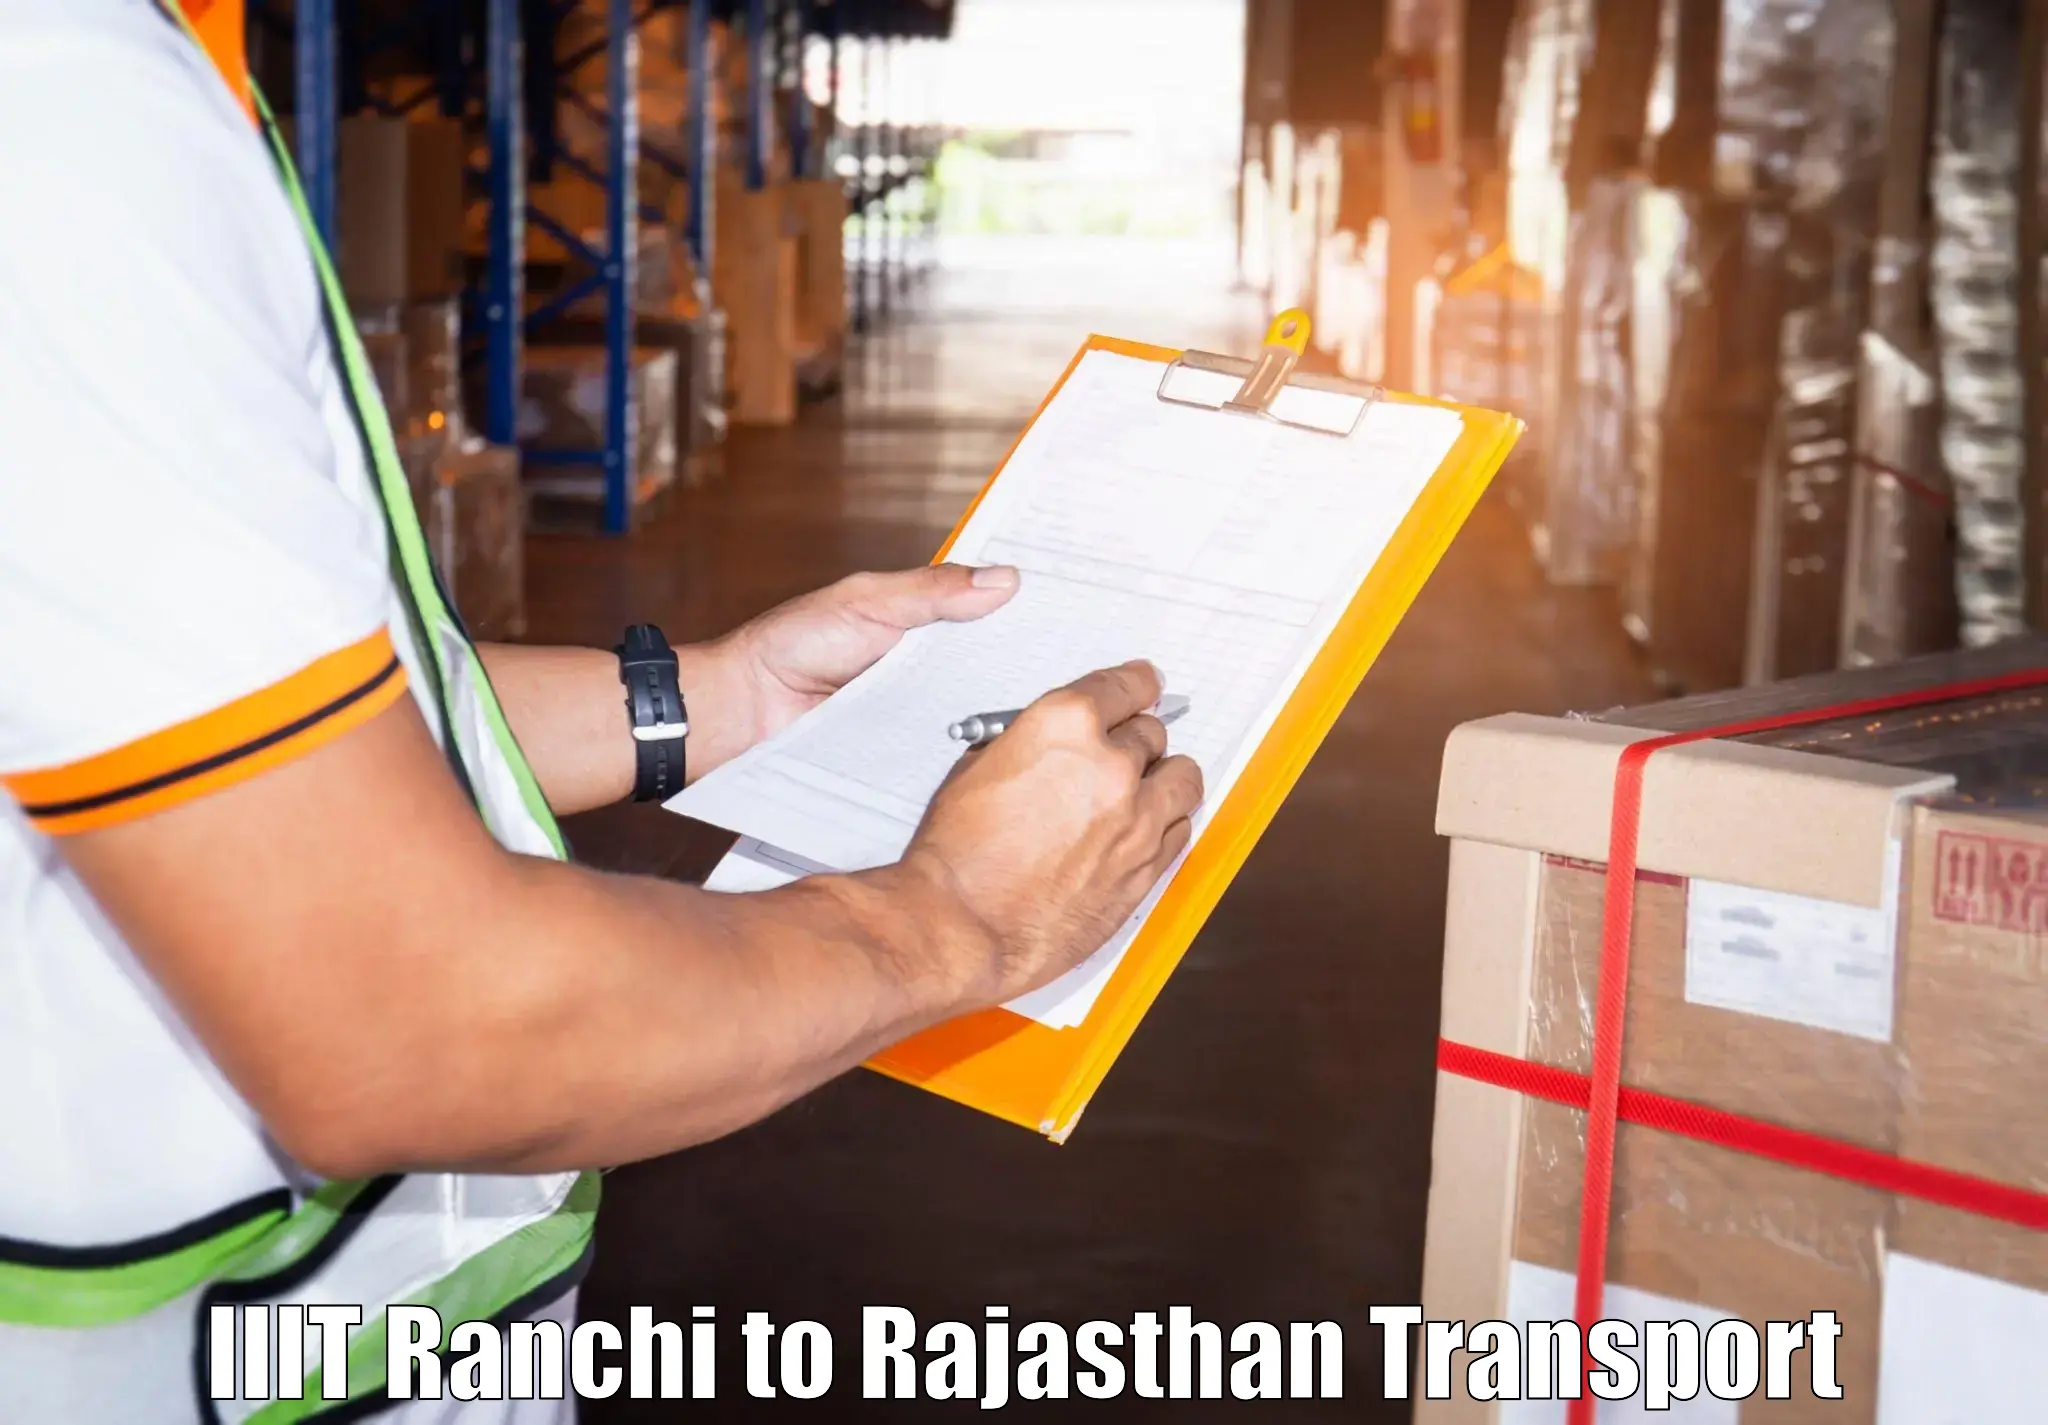 Domestic transport services in IIIT Ranchi to Bhiwadi